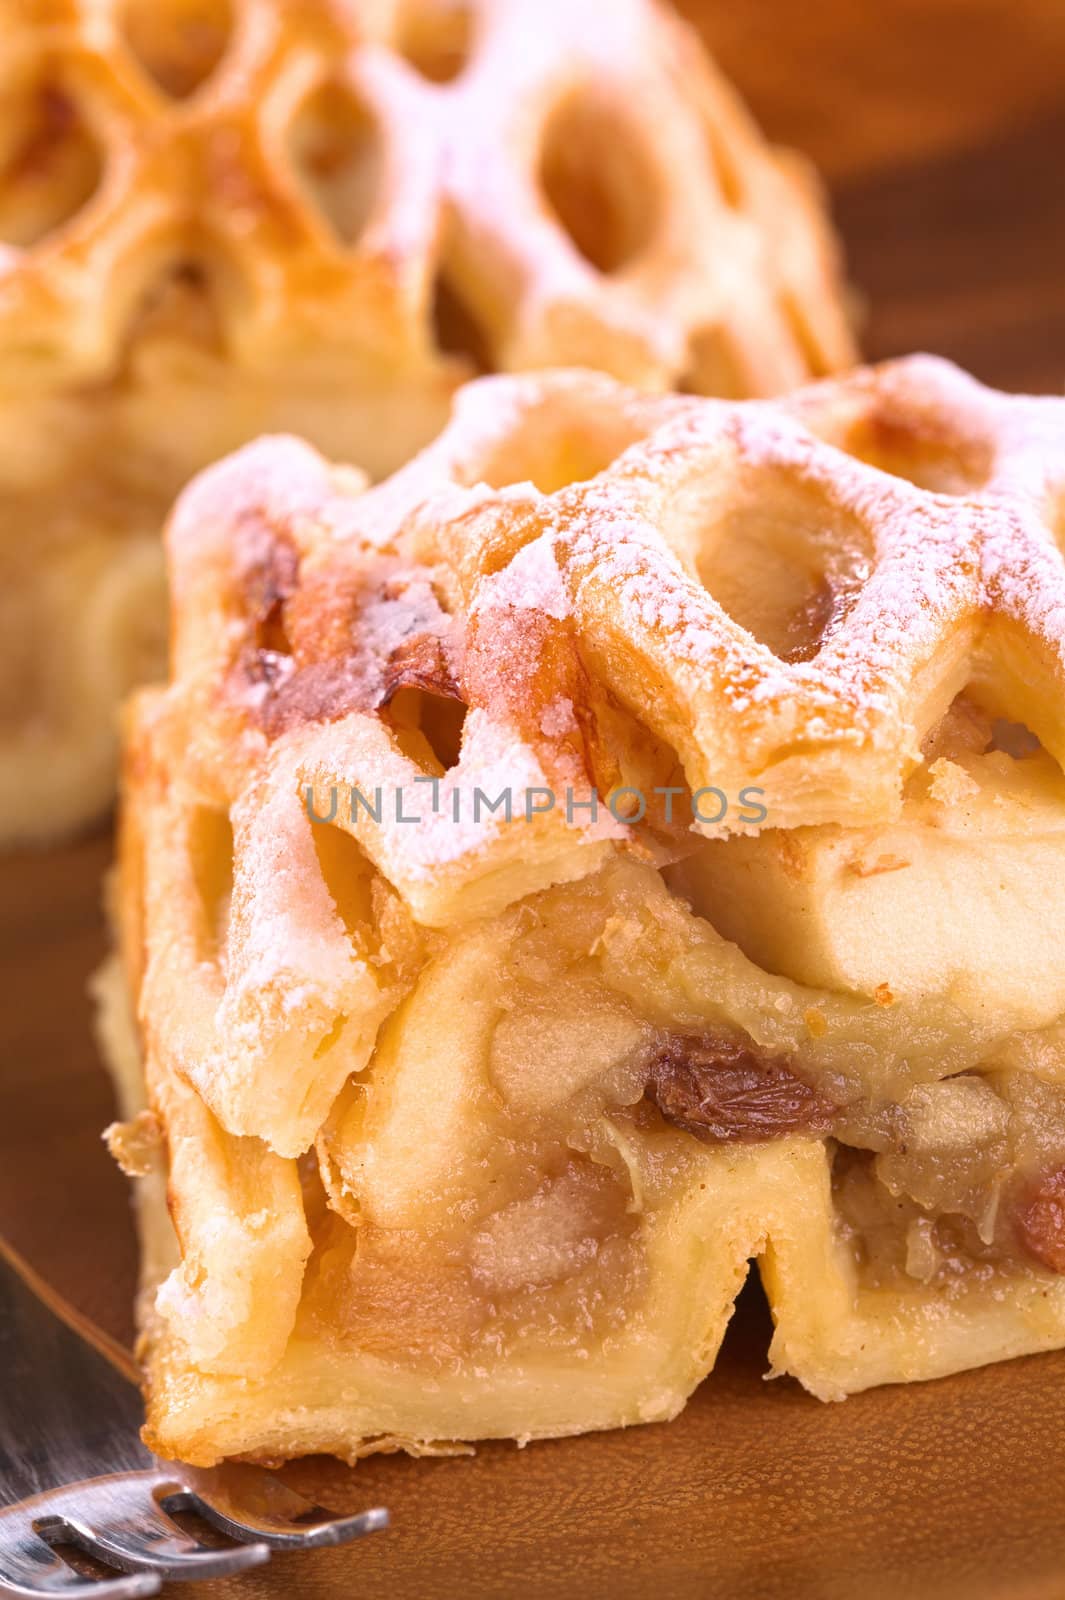 Apple strudel with raisins (Selective Focus, Focus on the upper part of the apple stuffing)